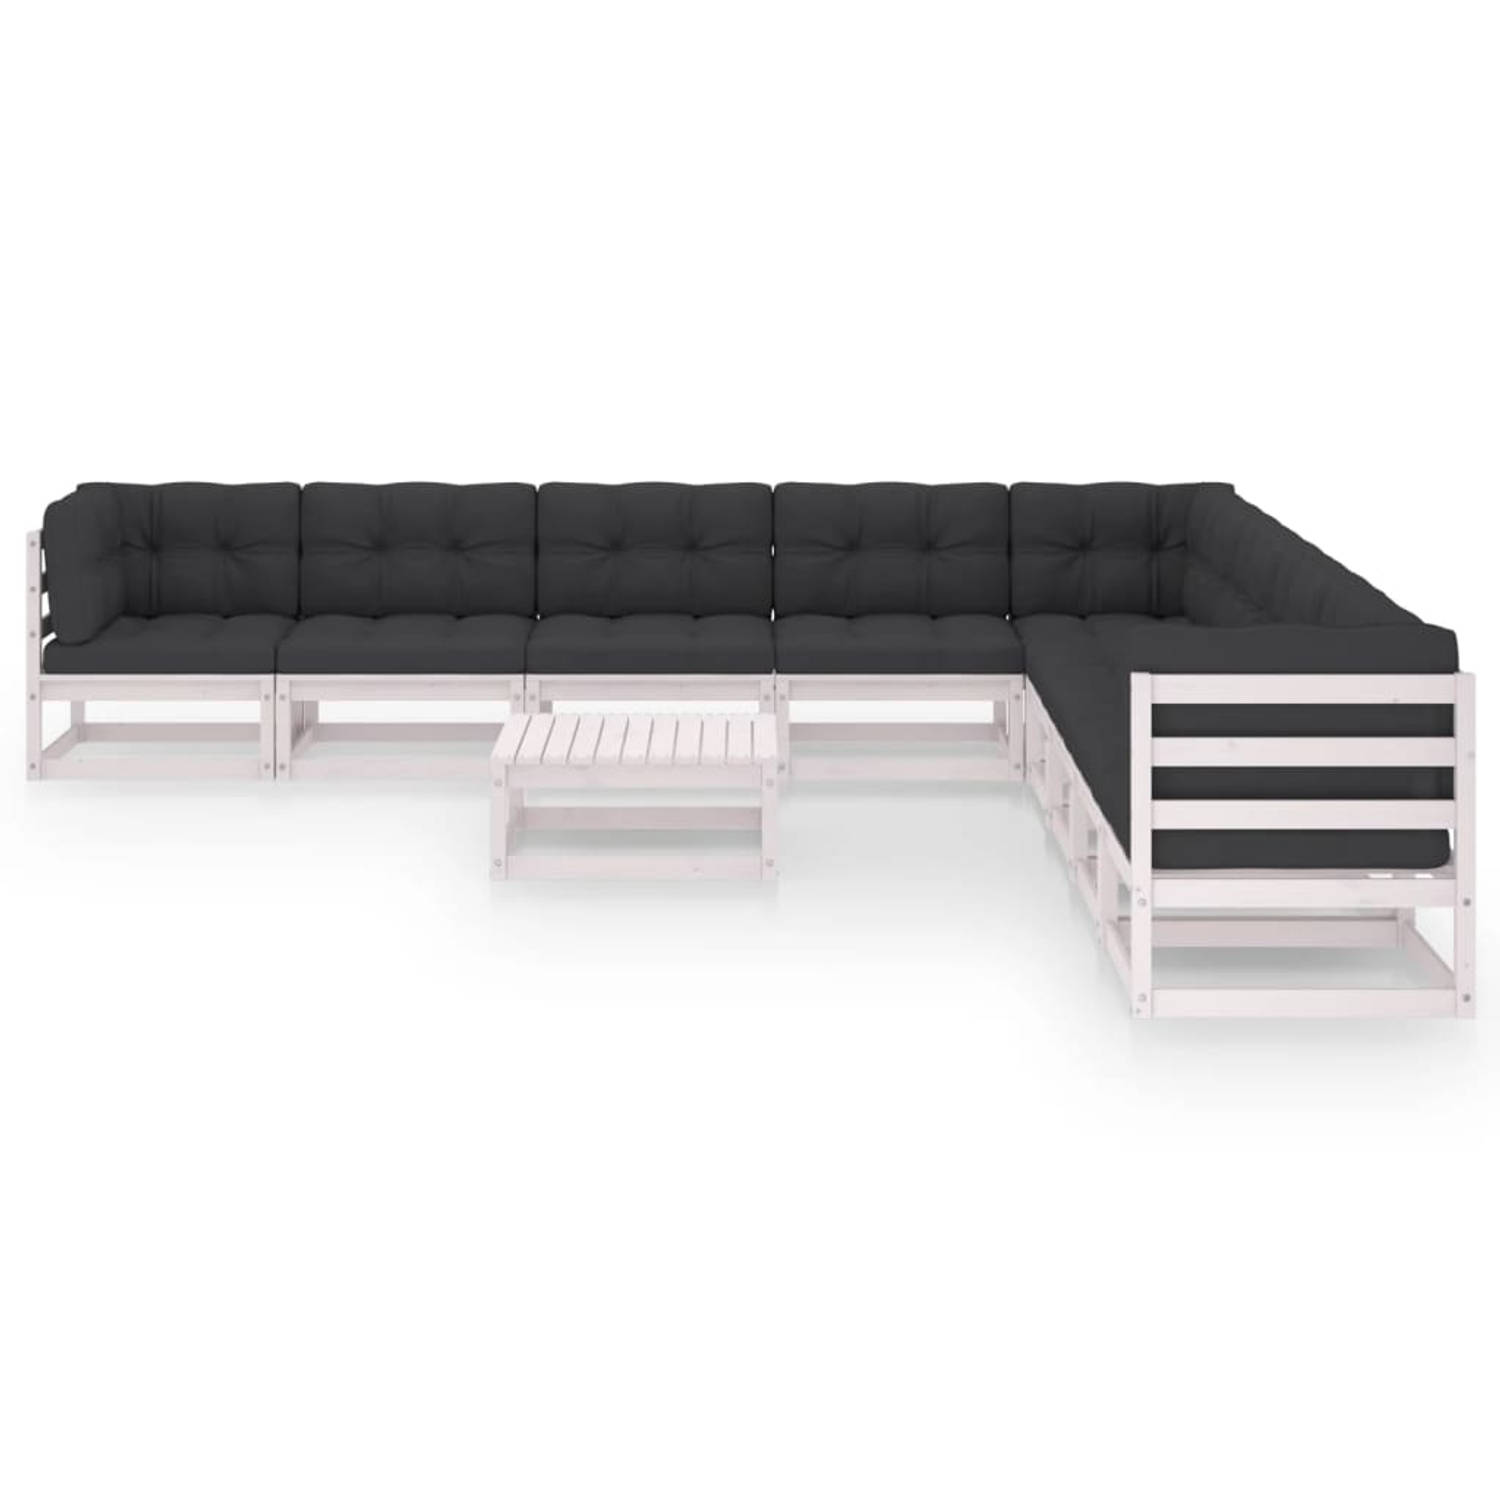 The Living Store 10-delige Loungeset met kussens massief grenenhout wit - Tuinset